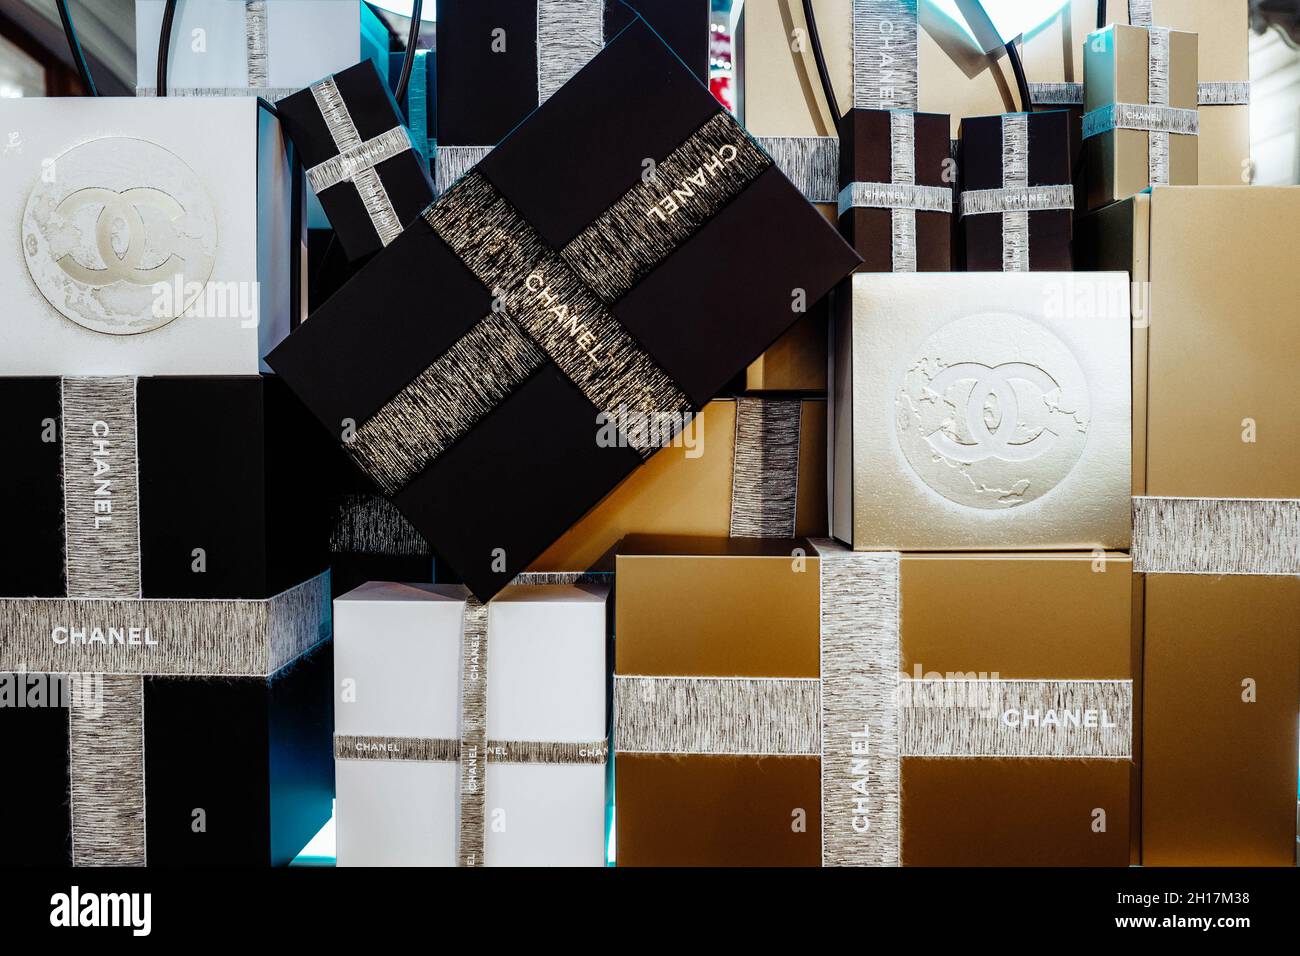 Chanel New Year's Gift Wrapping Supplies